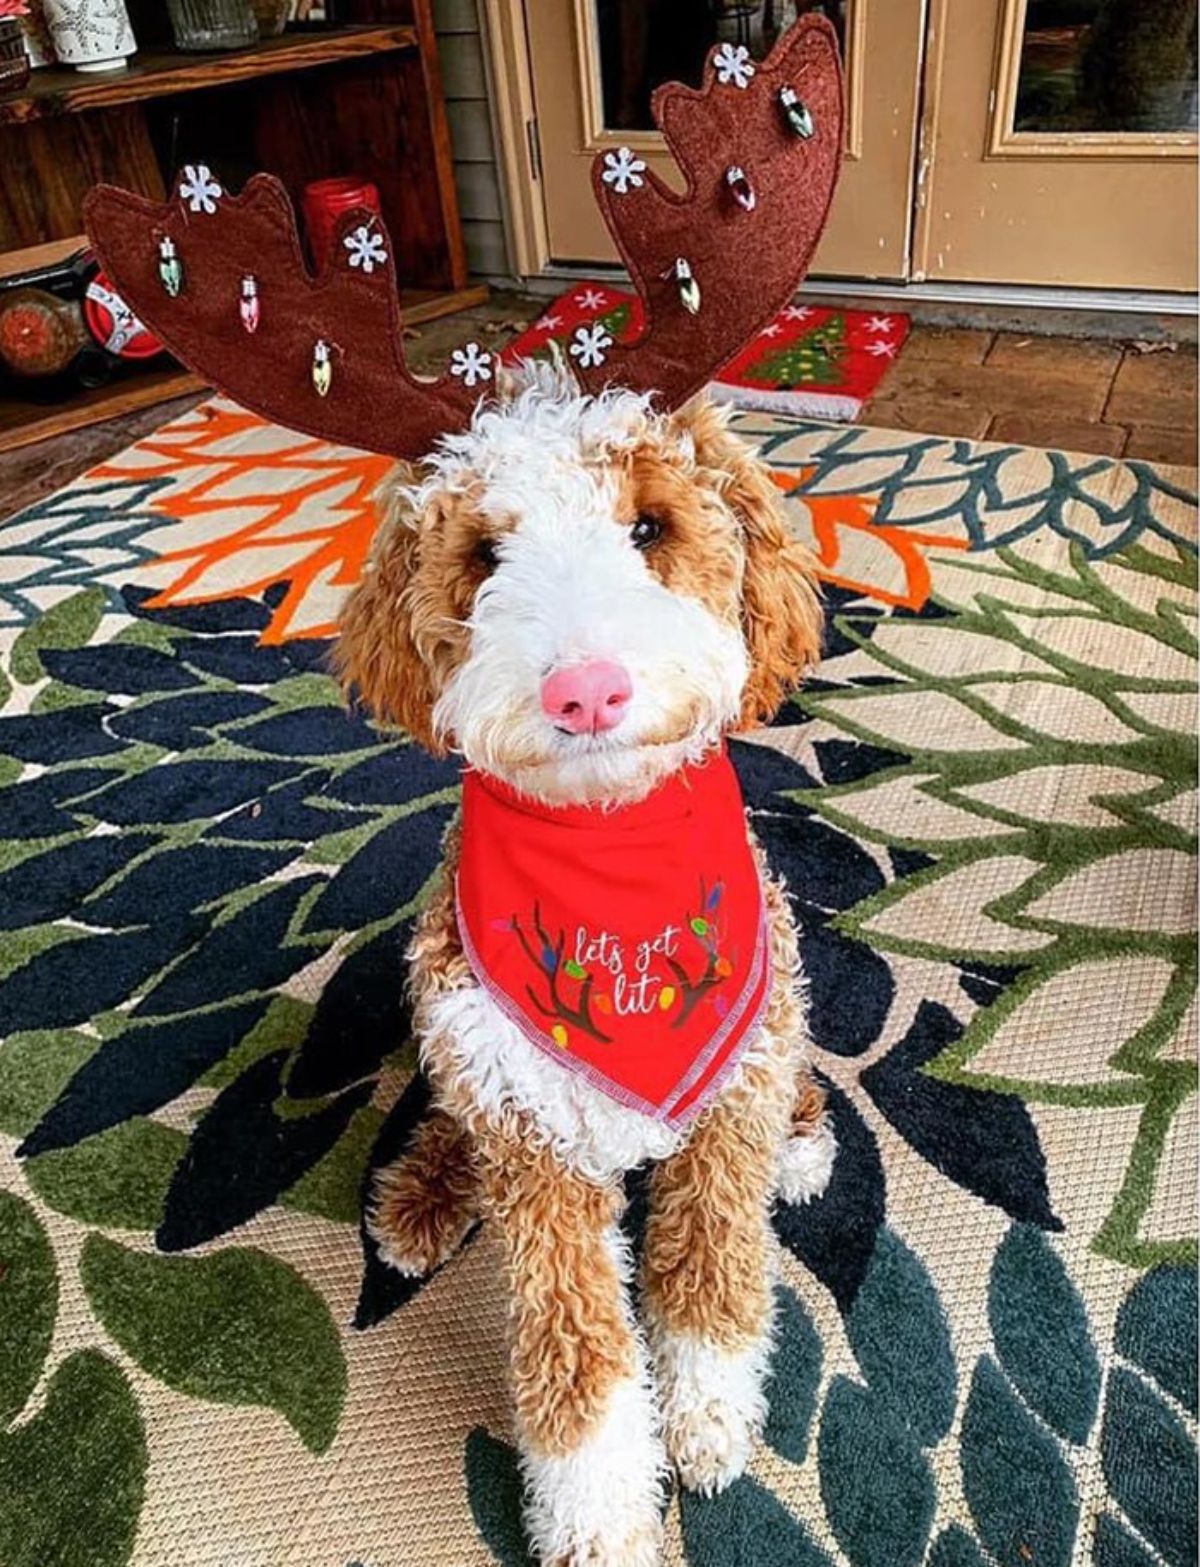 a smiling fluffy brown and white dog in a reindeer costume